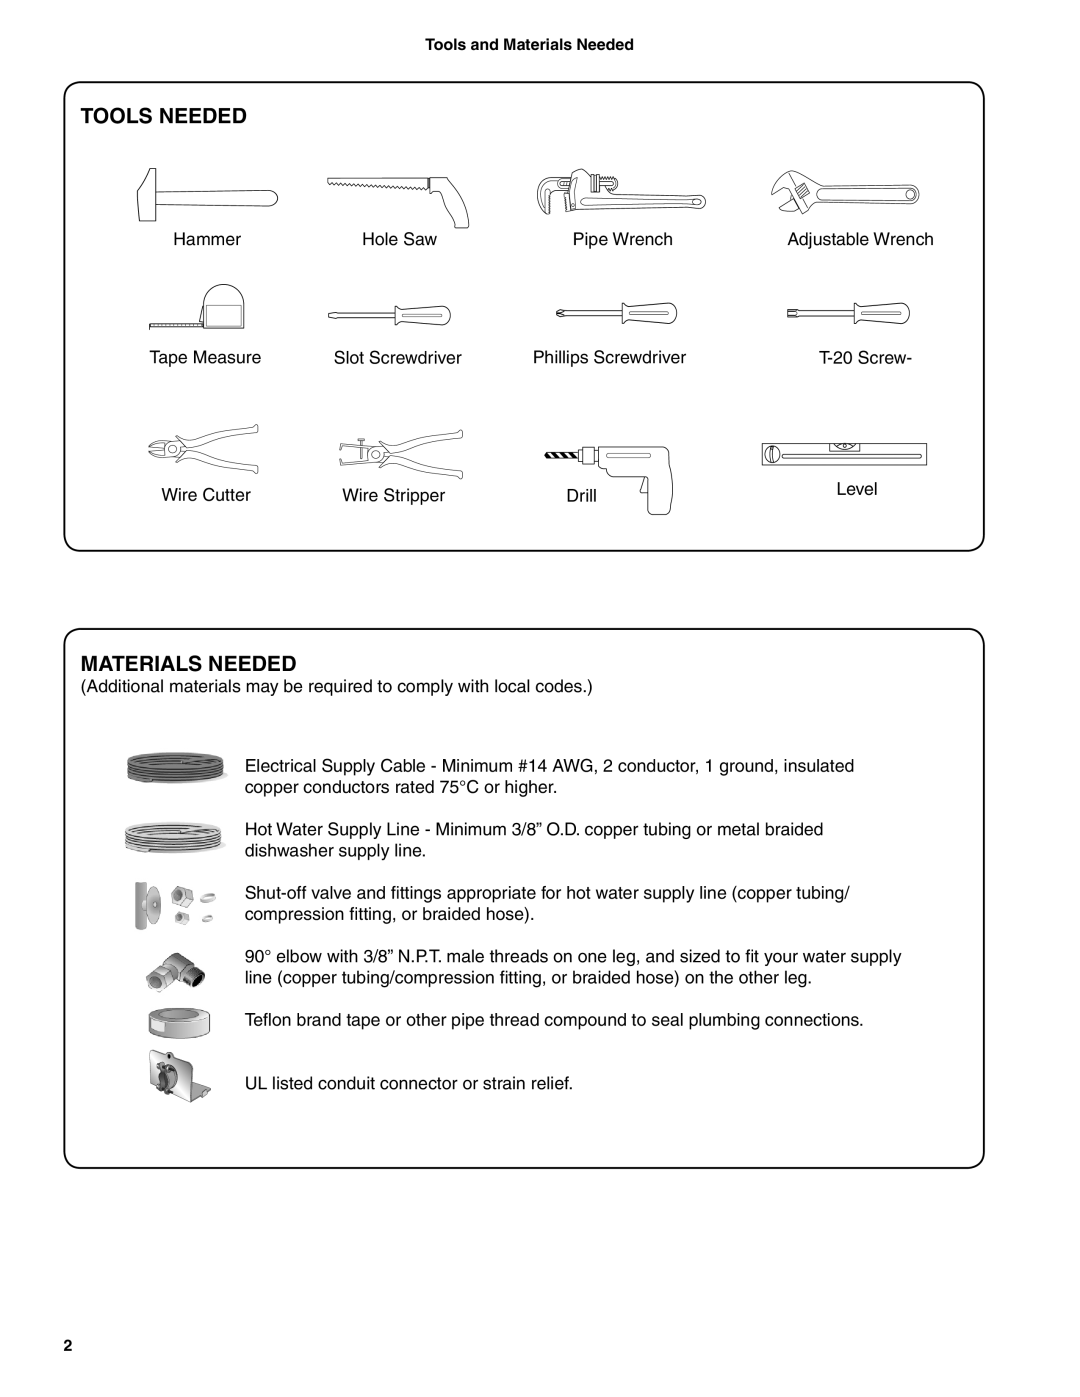 Bosch Appliances BSH Dishwasher important safety instructions Tools Needed, Materials Needed 